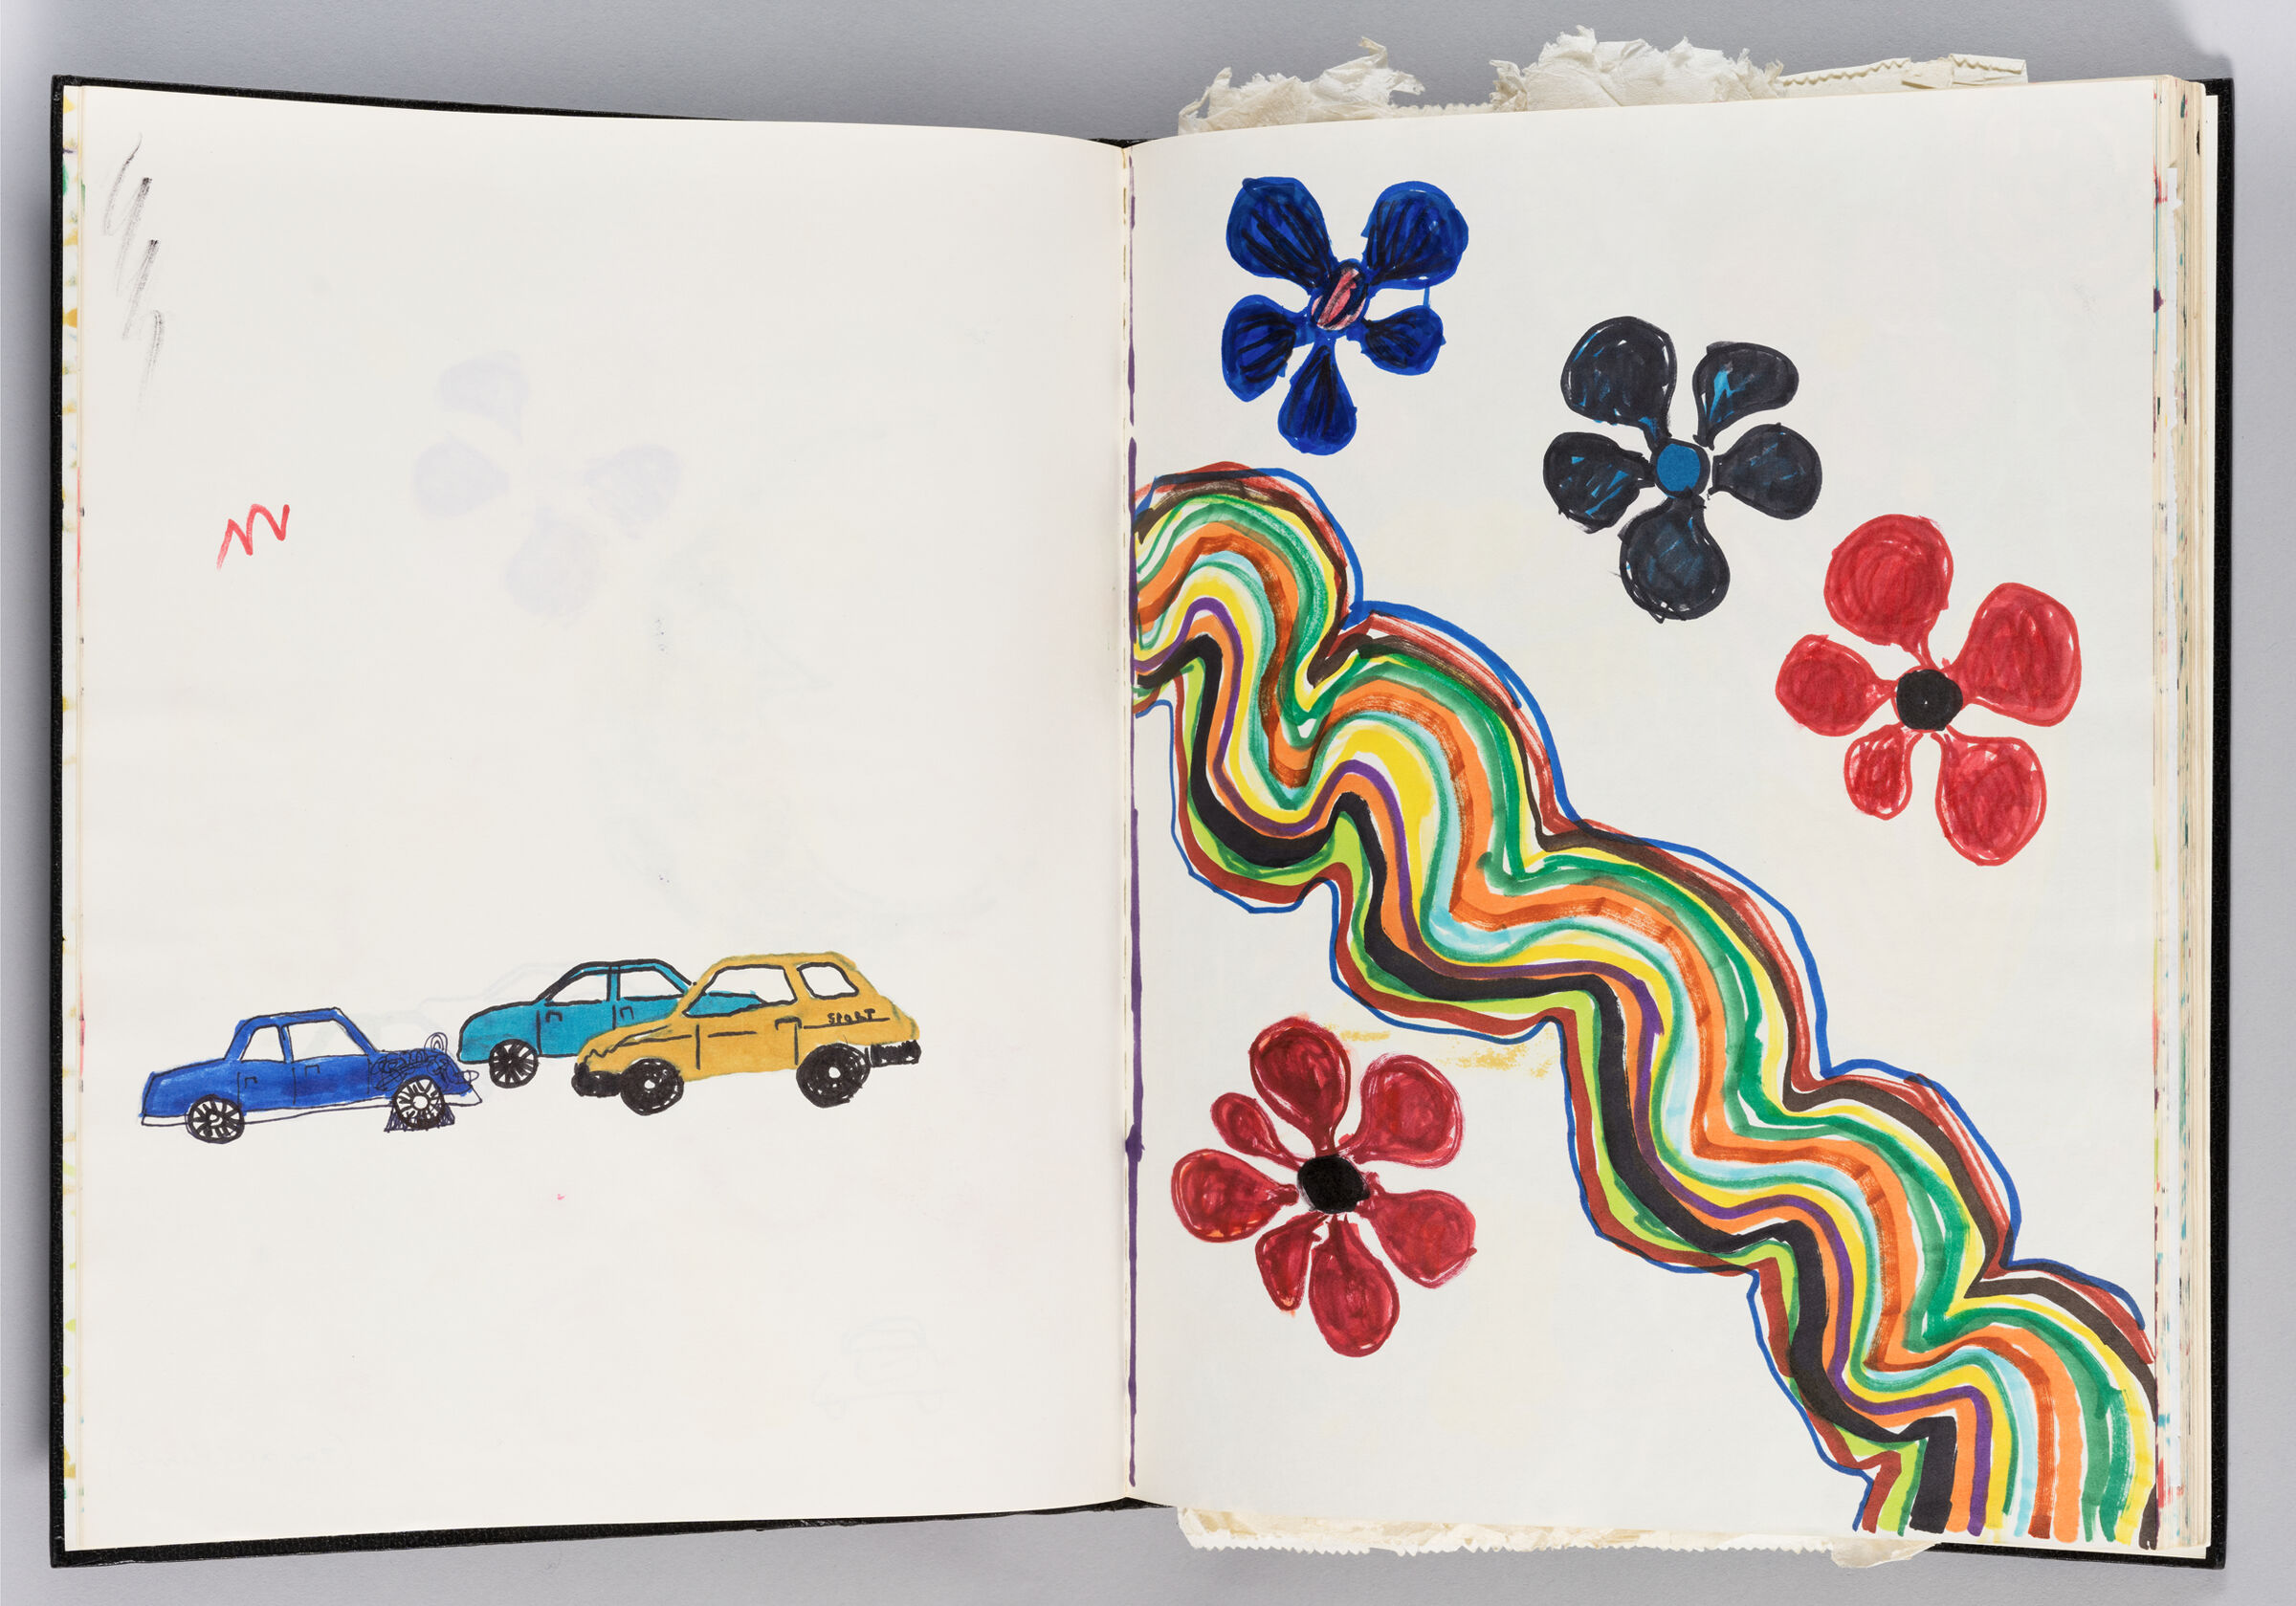 Untitled (Children's Drawing, Left Page); Untitled (Children's Drawing, Right Page)